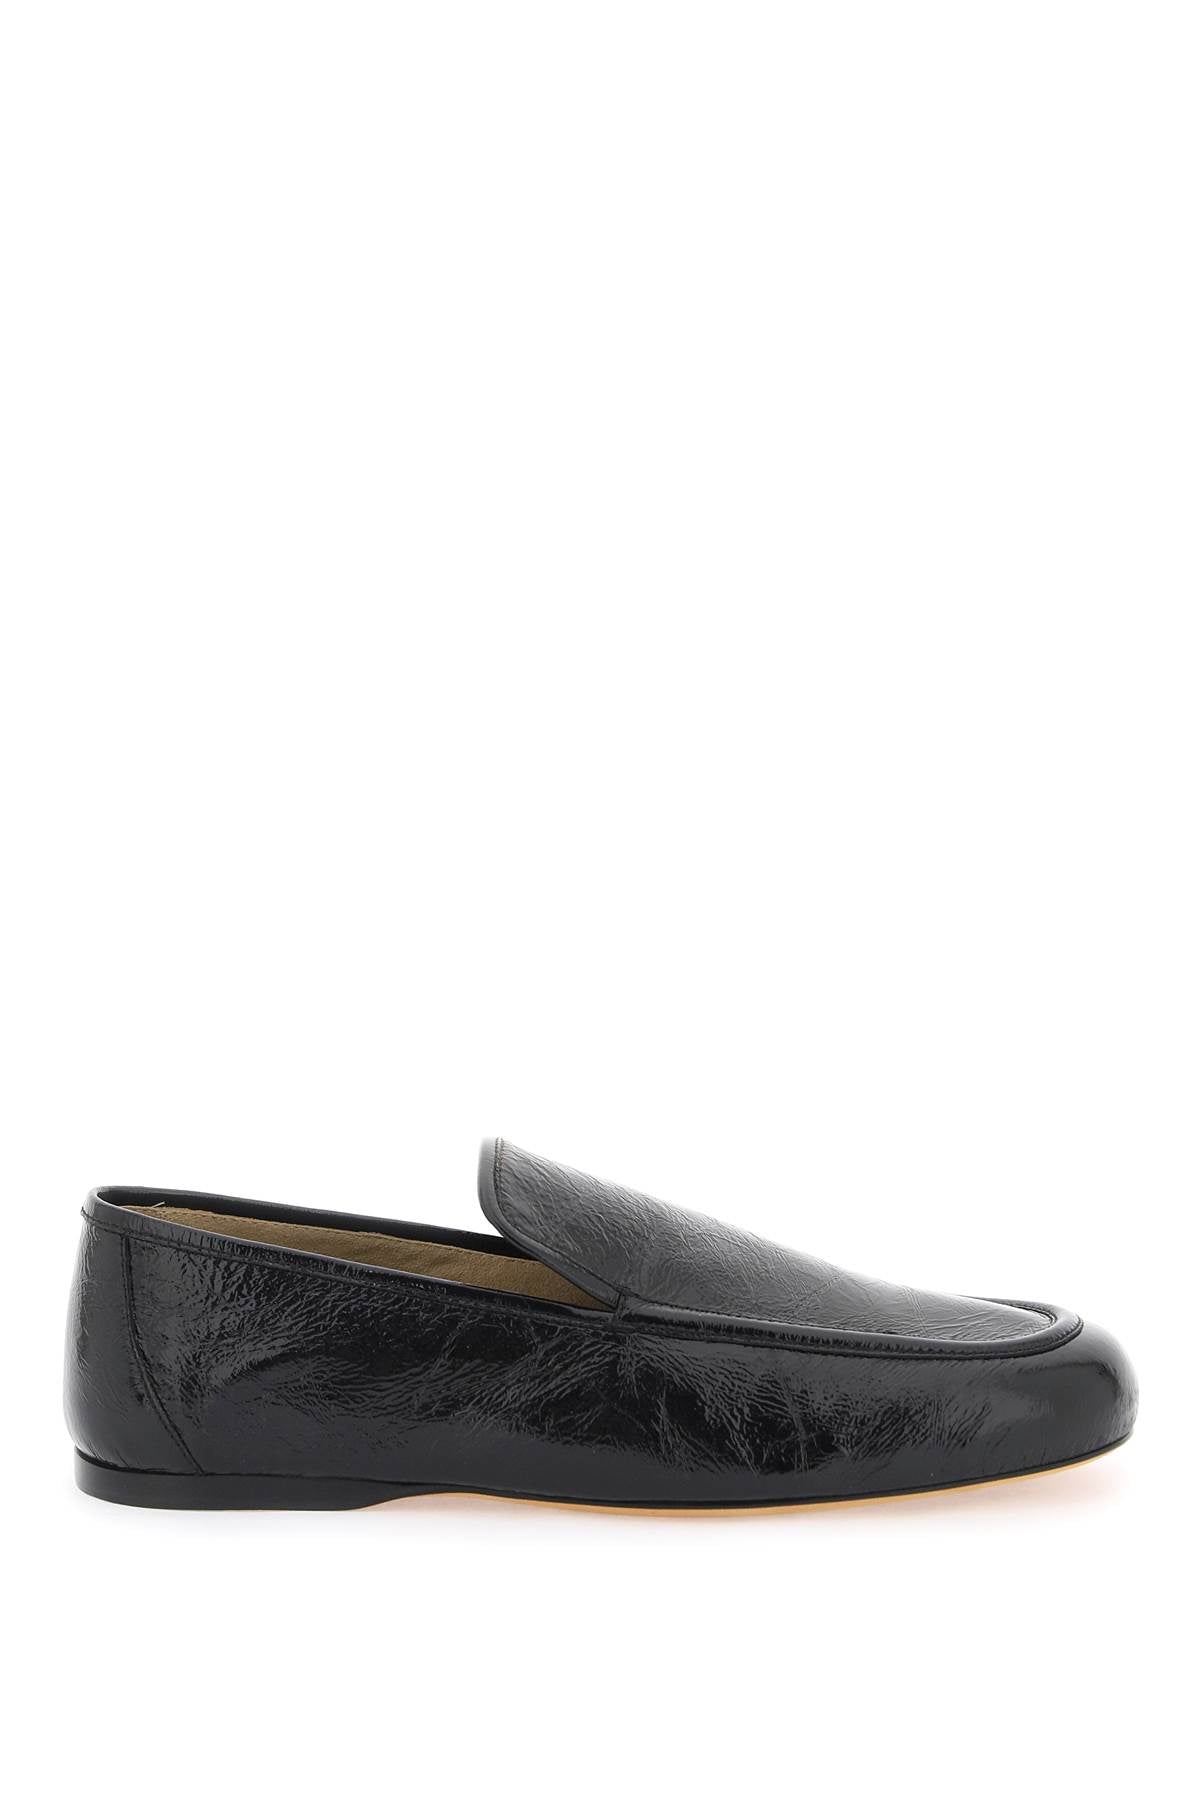 Glossy Black Leather Loafers with Crinkled Effect for Women